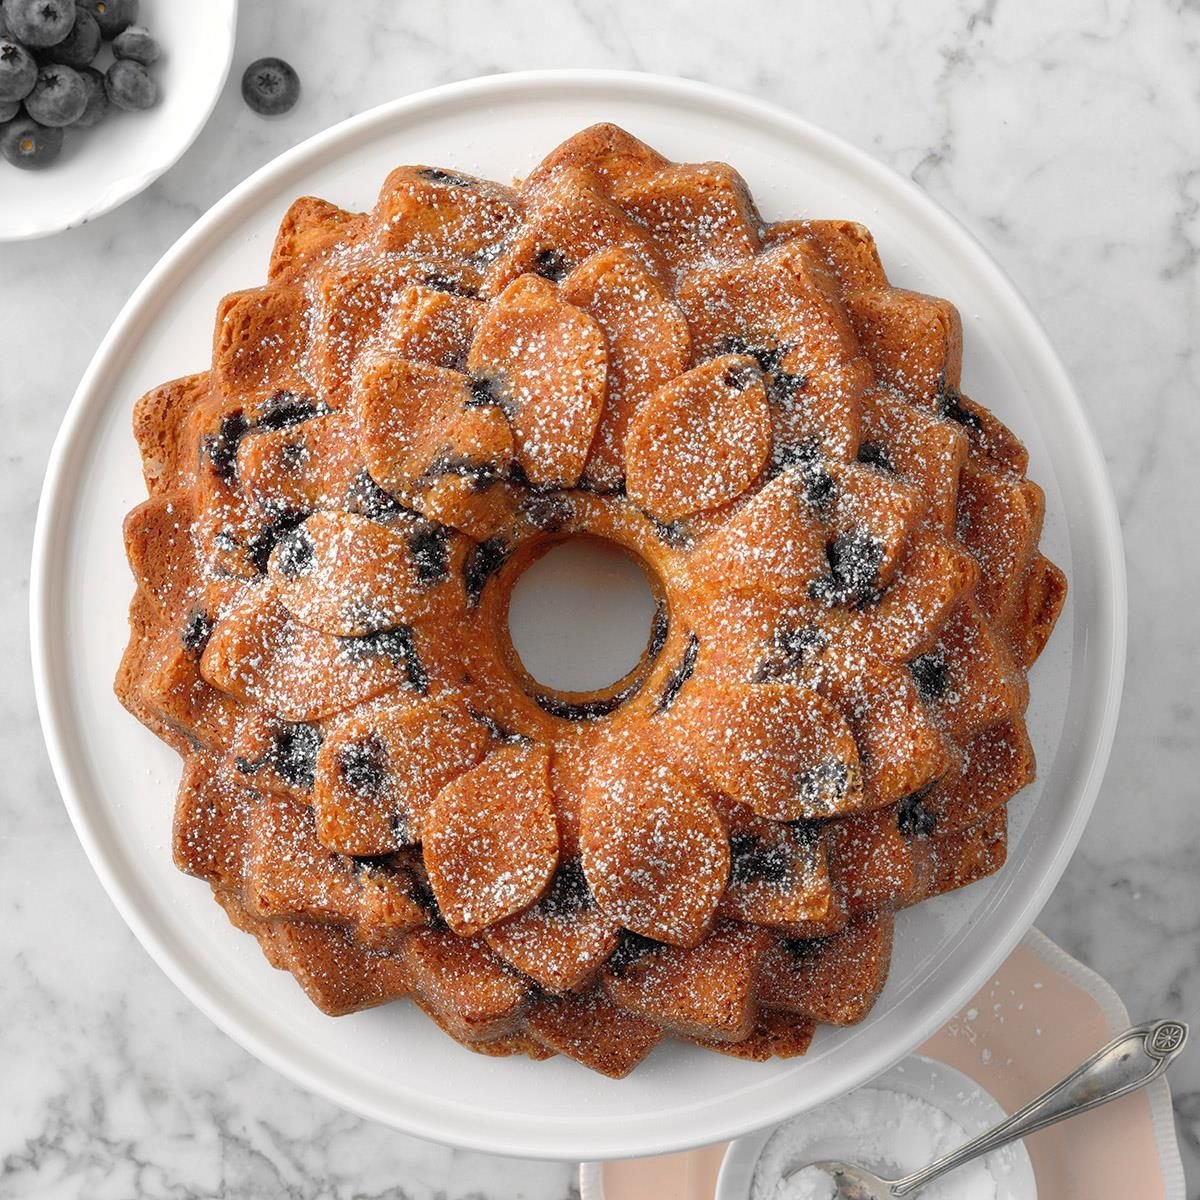 https://www.tasteofhome.com/wp-content/uploads/2019/11/Blueberries-and-Cream-Coffee-Cake_EXPS_TOHAM20_148116_B11_07_7b-27.jpg?fit=700%2C1024